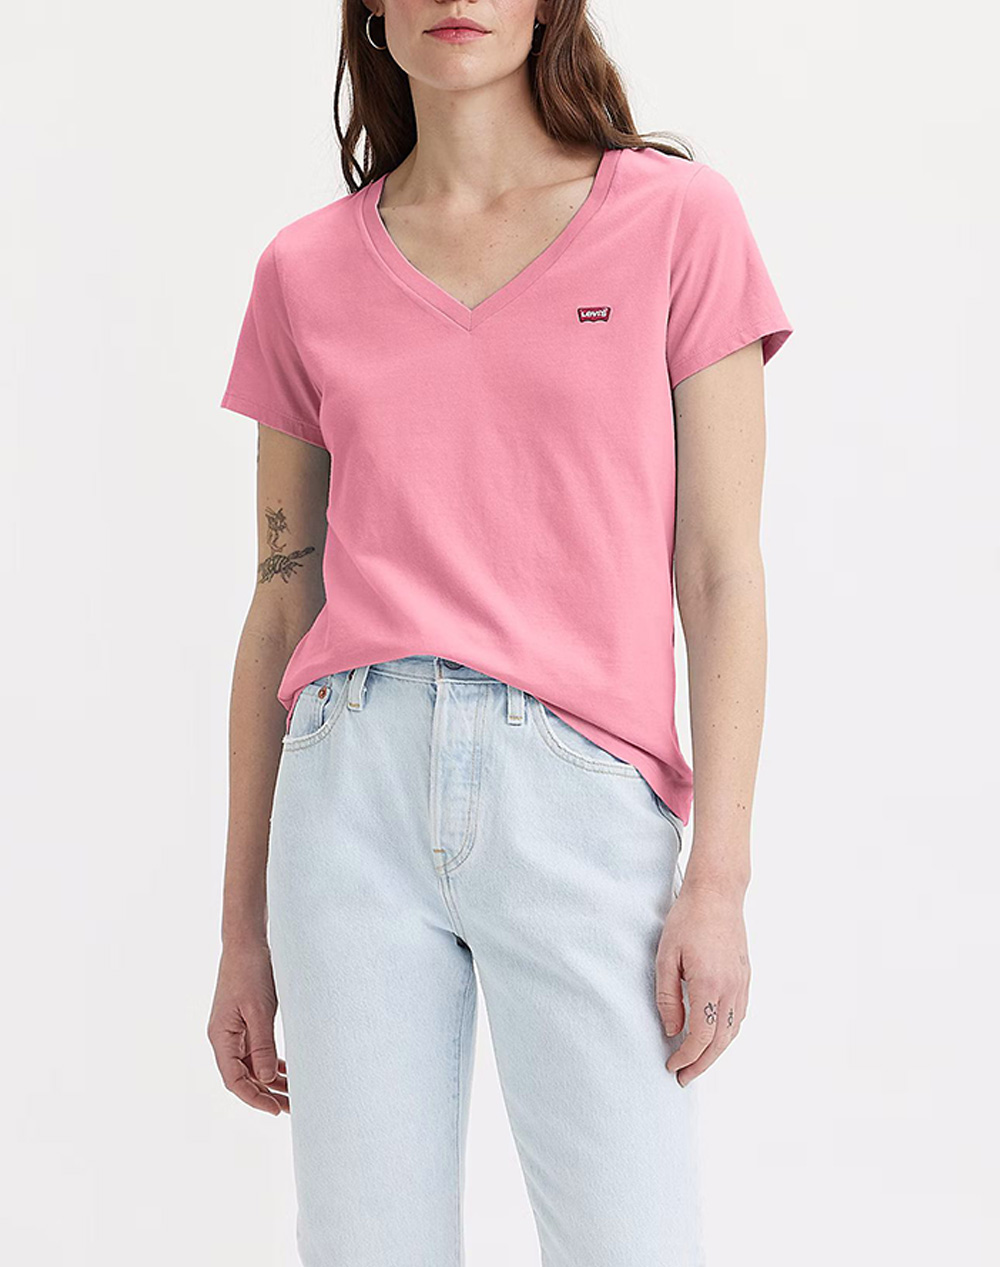 LEVIS PERFECT VNECK REDS 85341-0068-0068 Pink